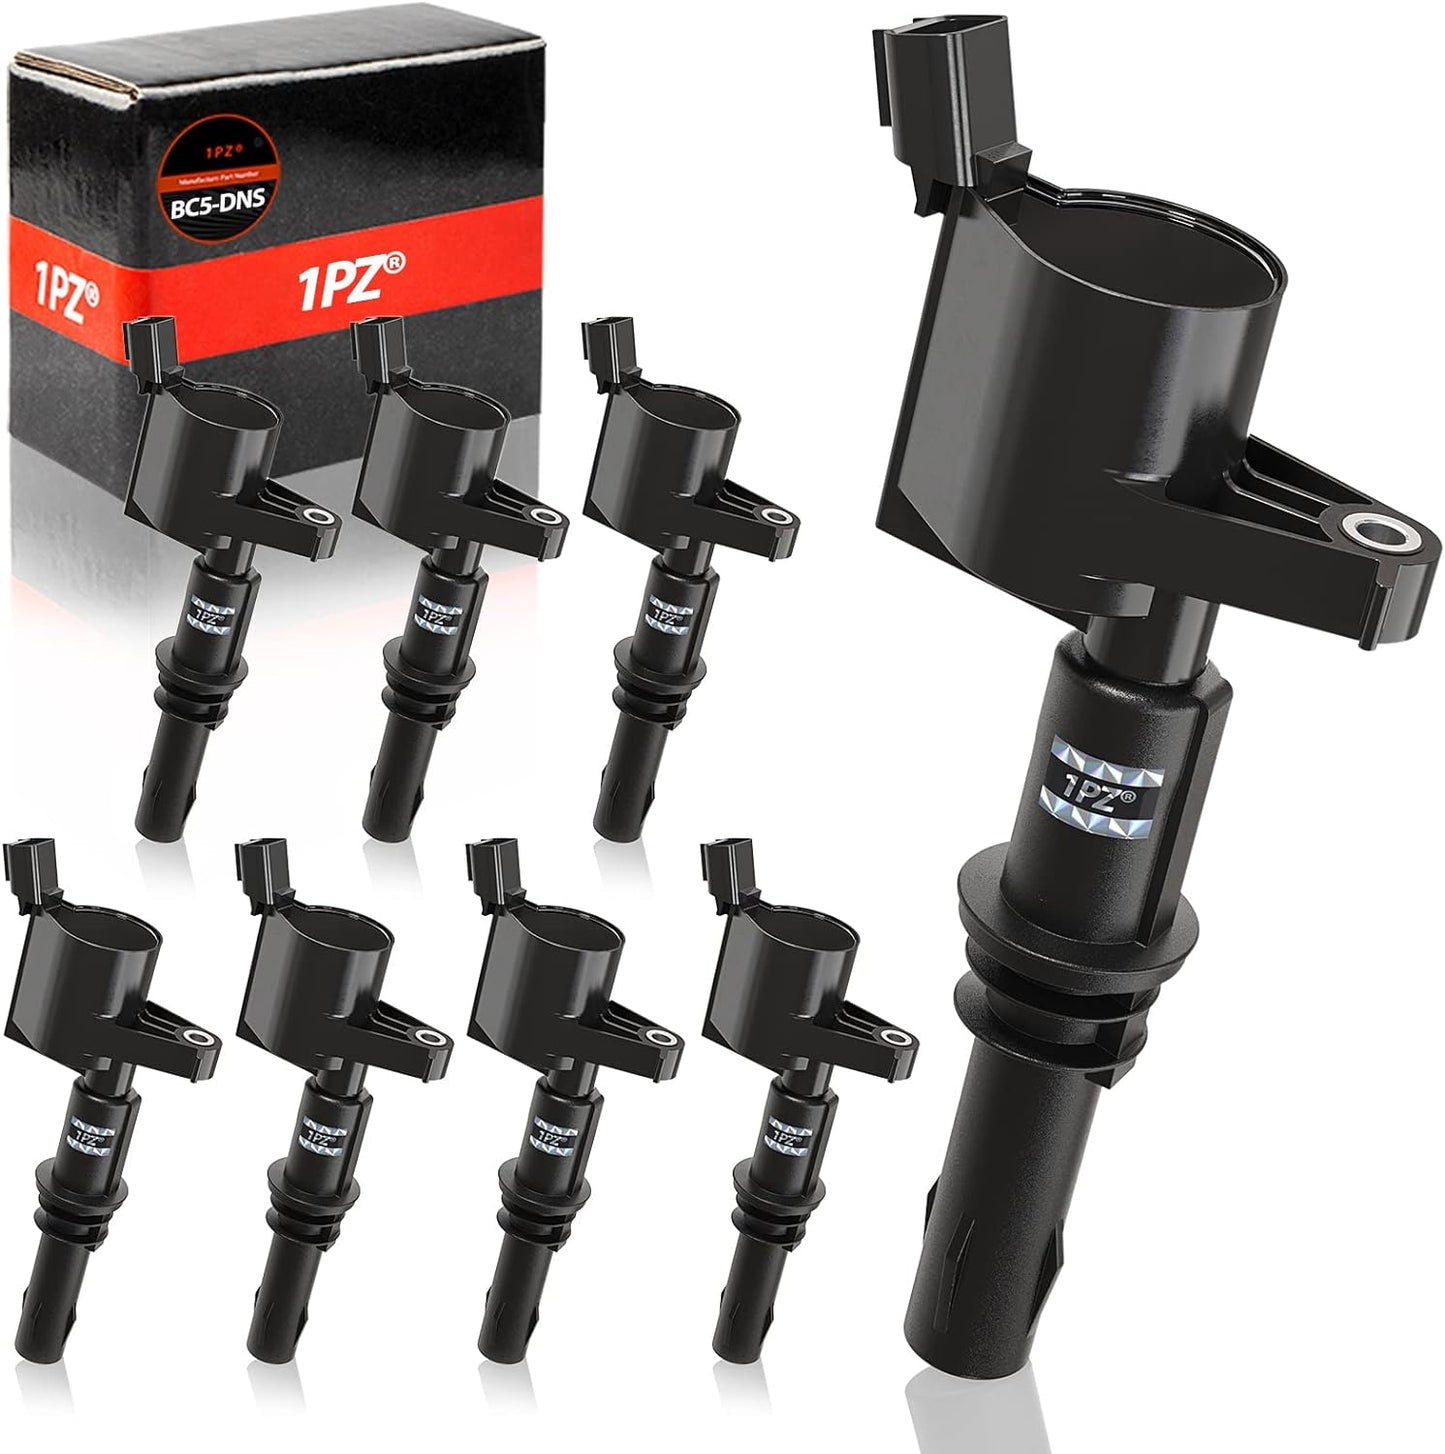 1PZ BC5-DNS Set of 8 Ignition Coil Pack Replacement for Ford Expedition F150 F250 F350 Super Duty Lincoln Mark Navigator DG511 C1541 FD508 5C1584 E508 C1659